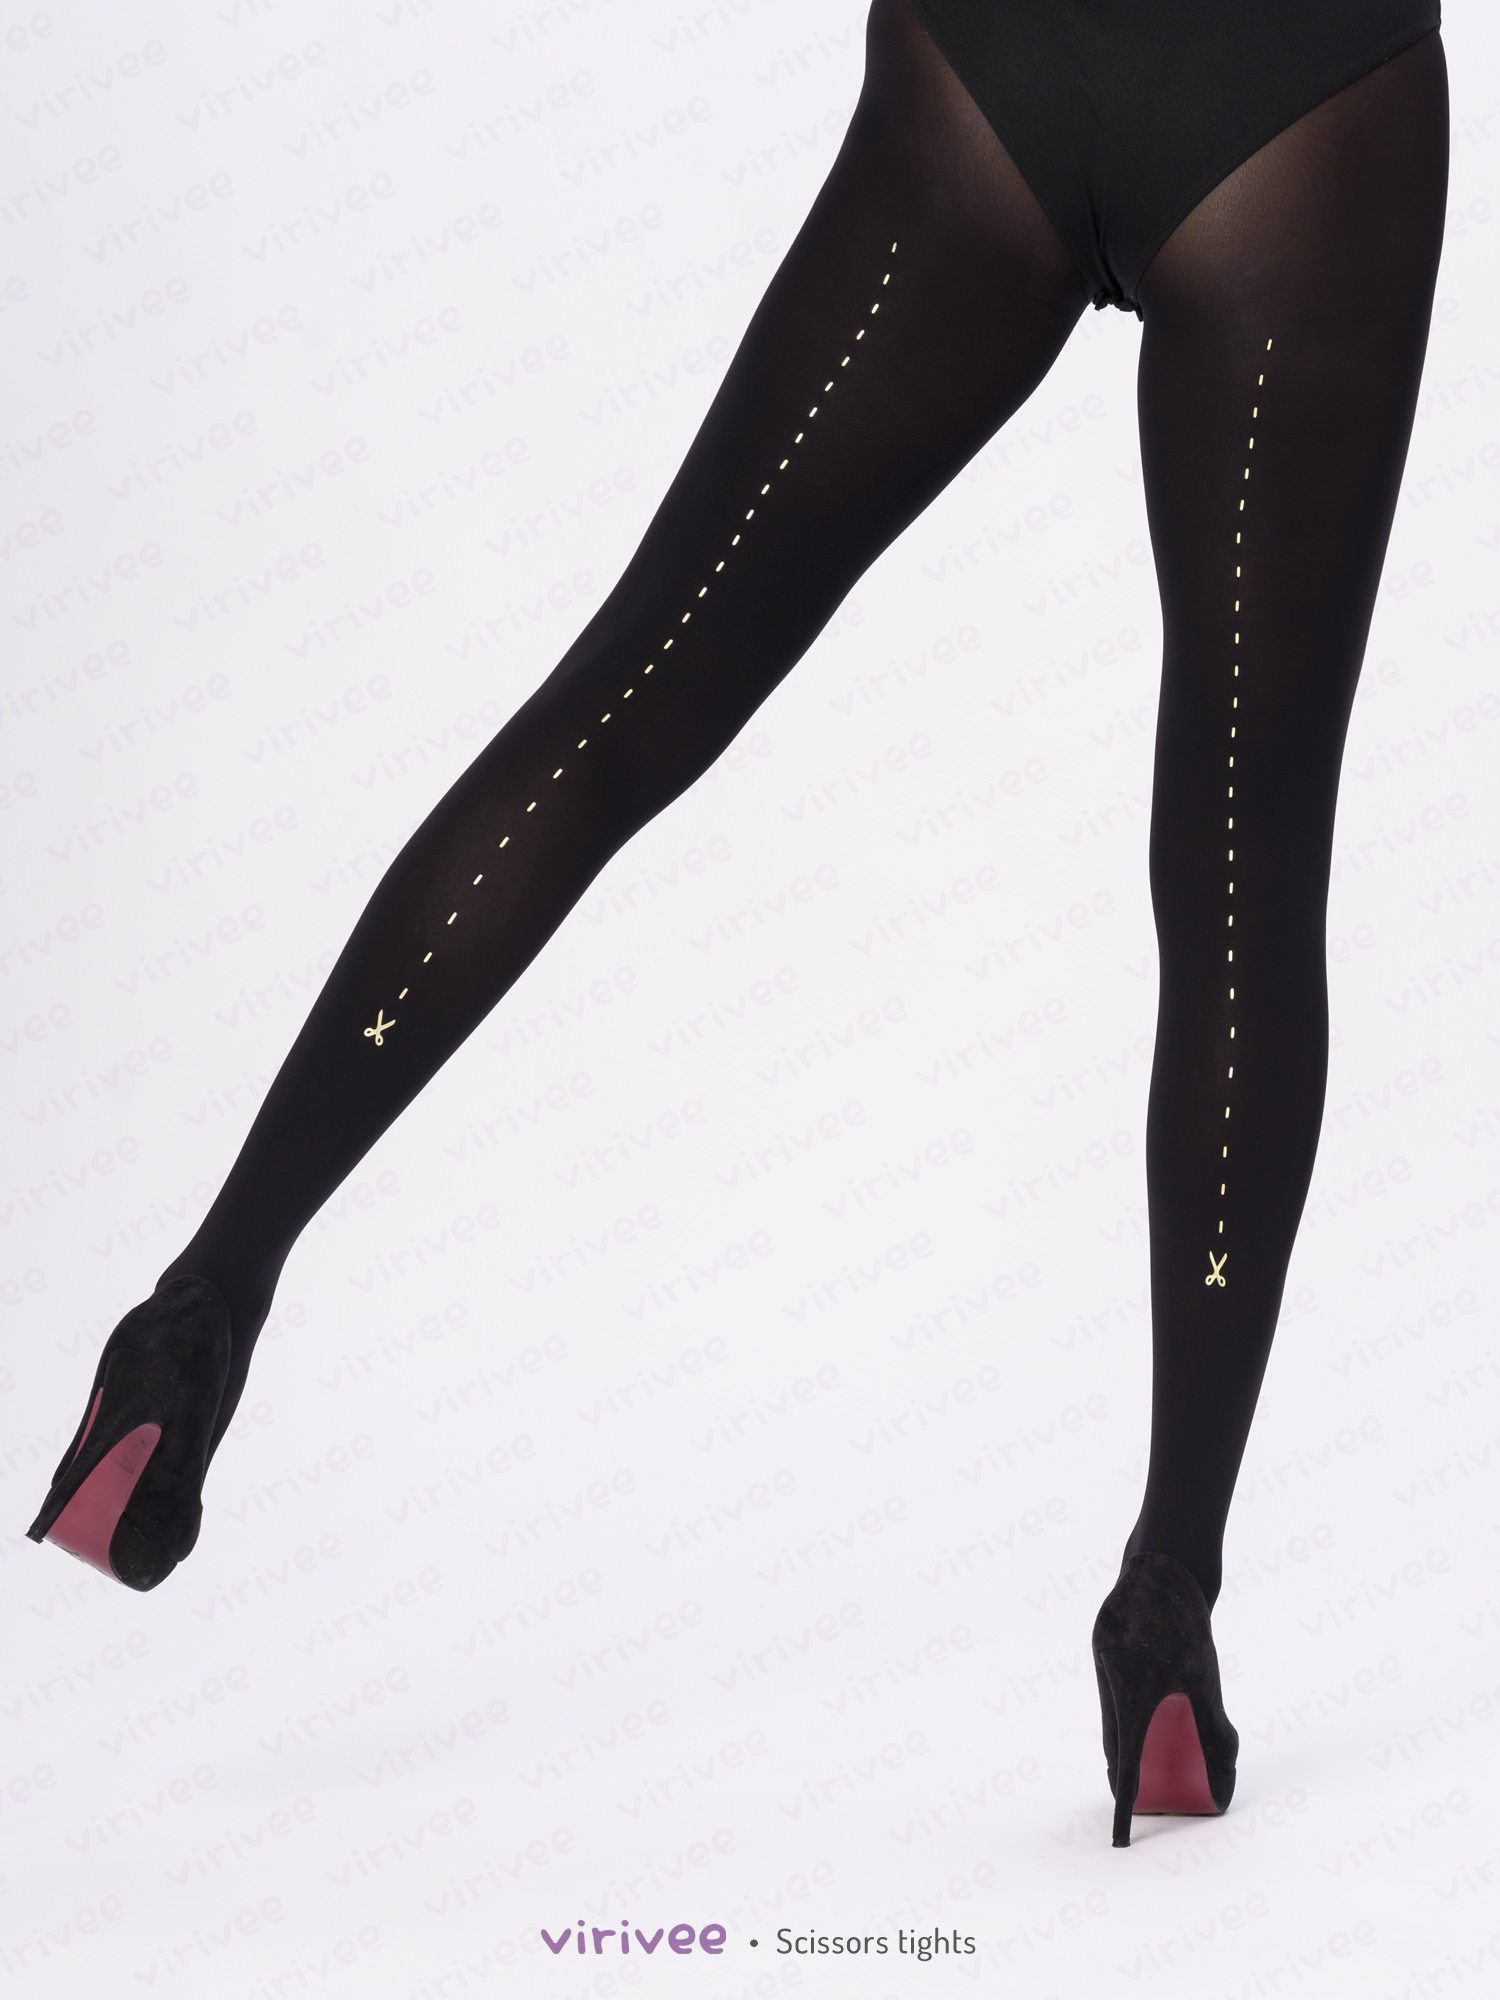 Scissors and line seamed style printed tights